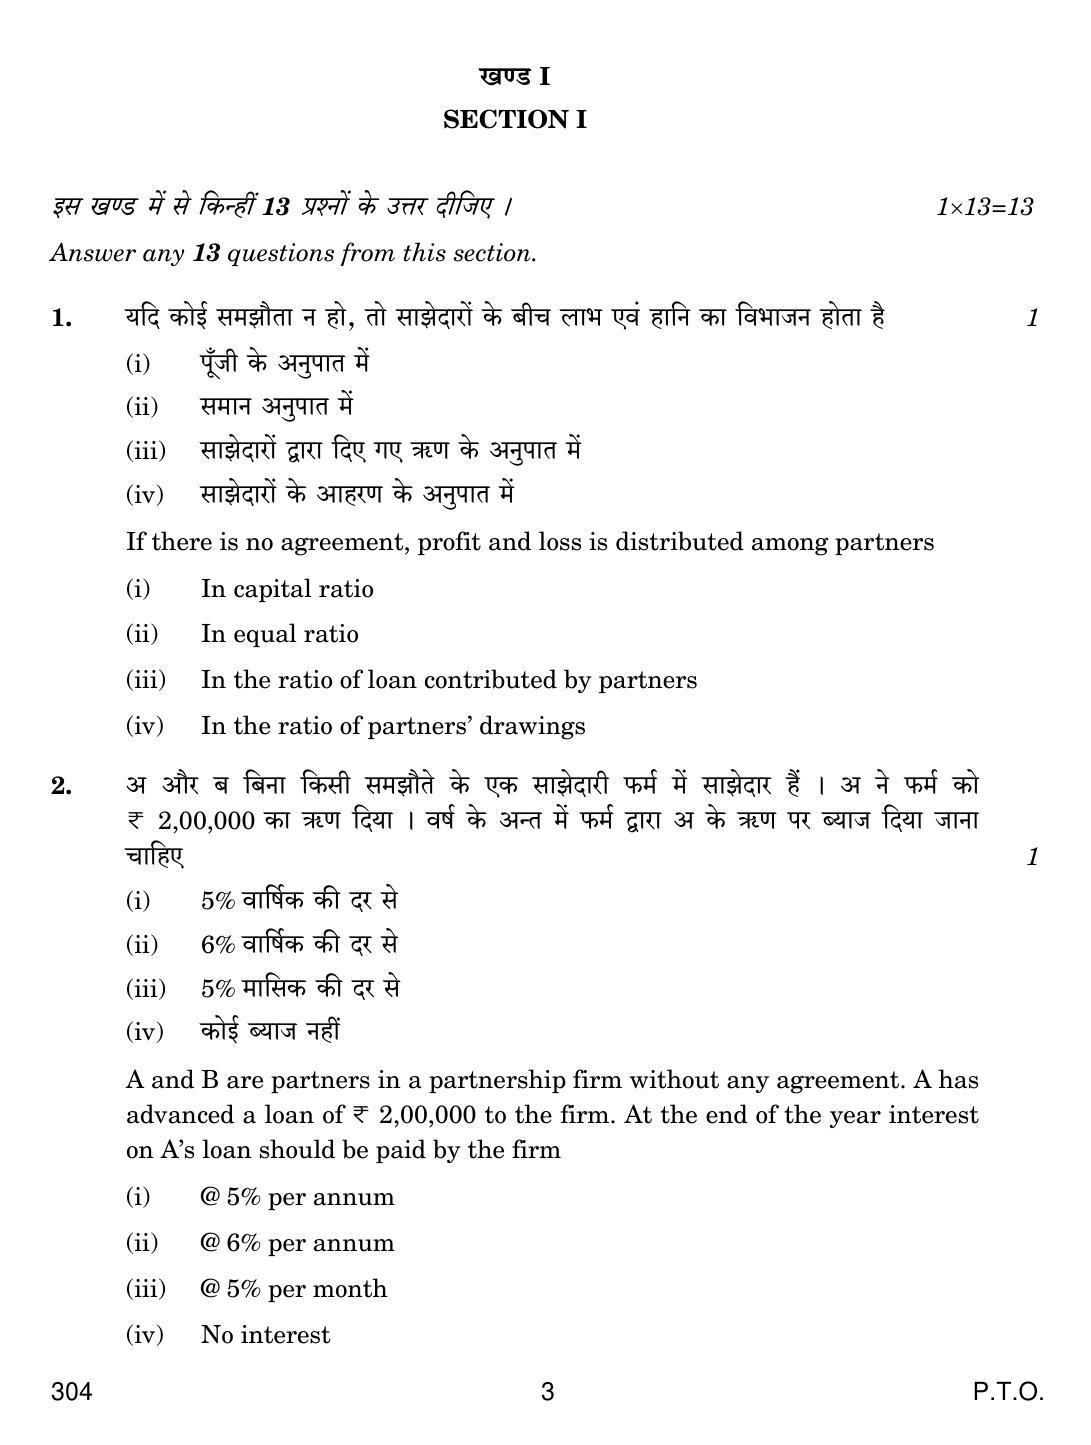 CBSE Class 12 304 FINANCIAL ACCOUNTING 2018 Question Paper - Page 3